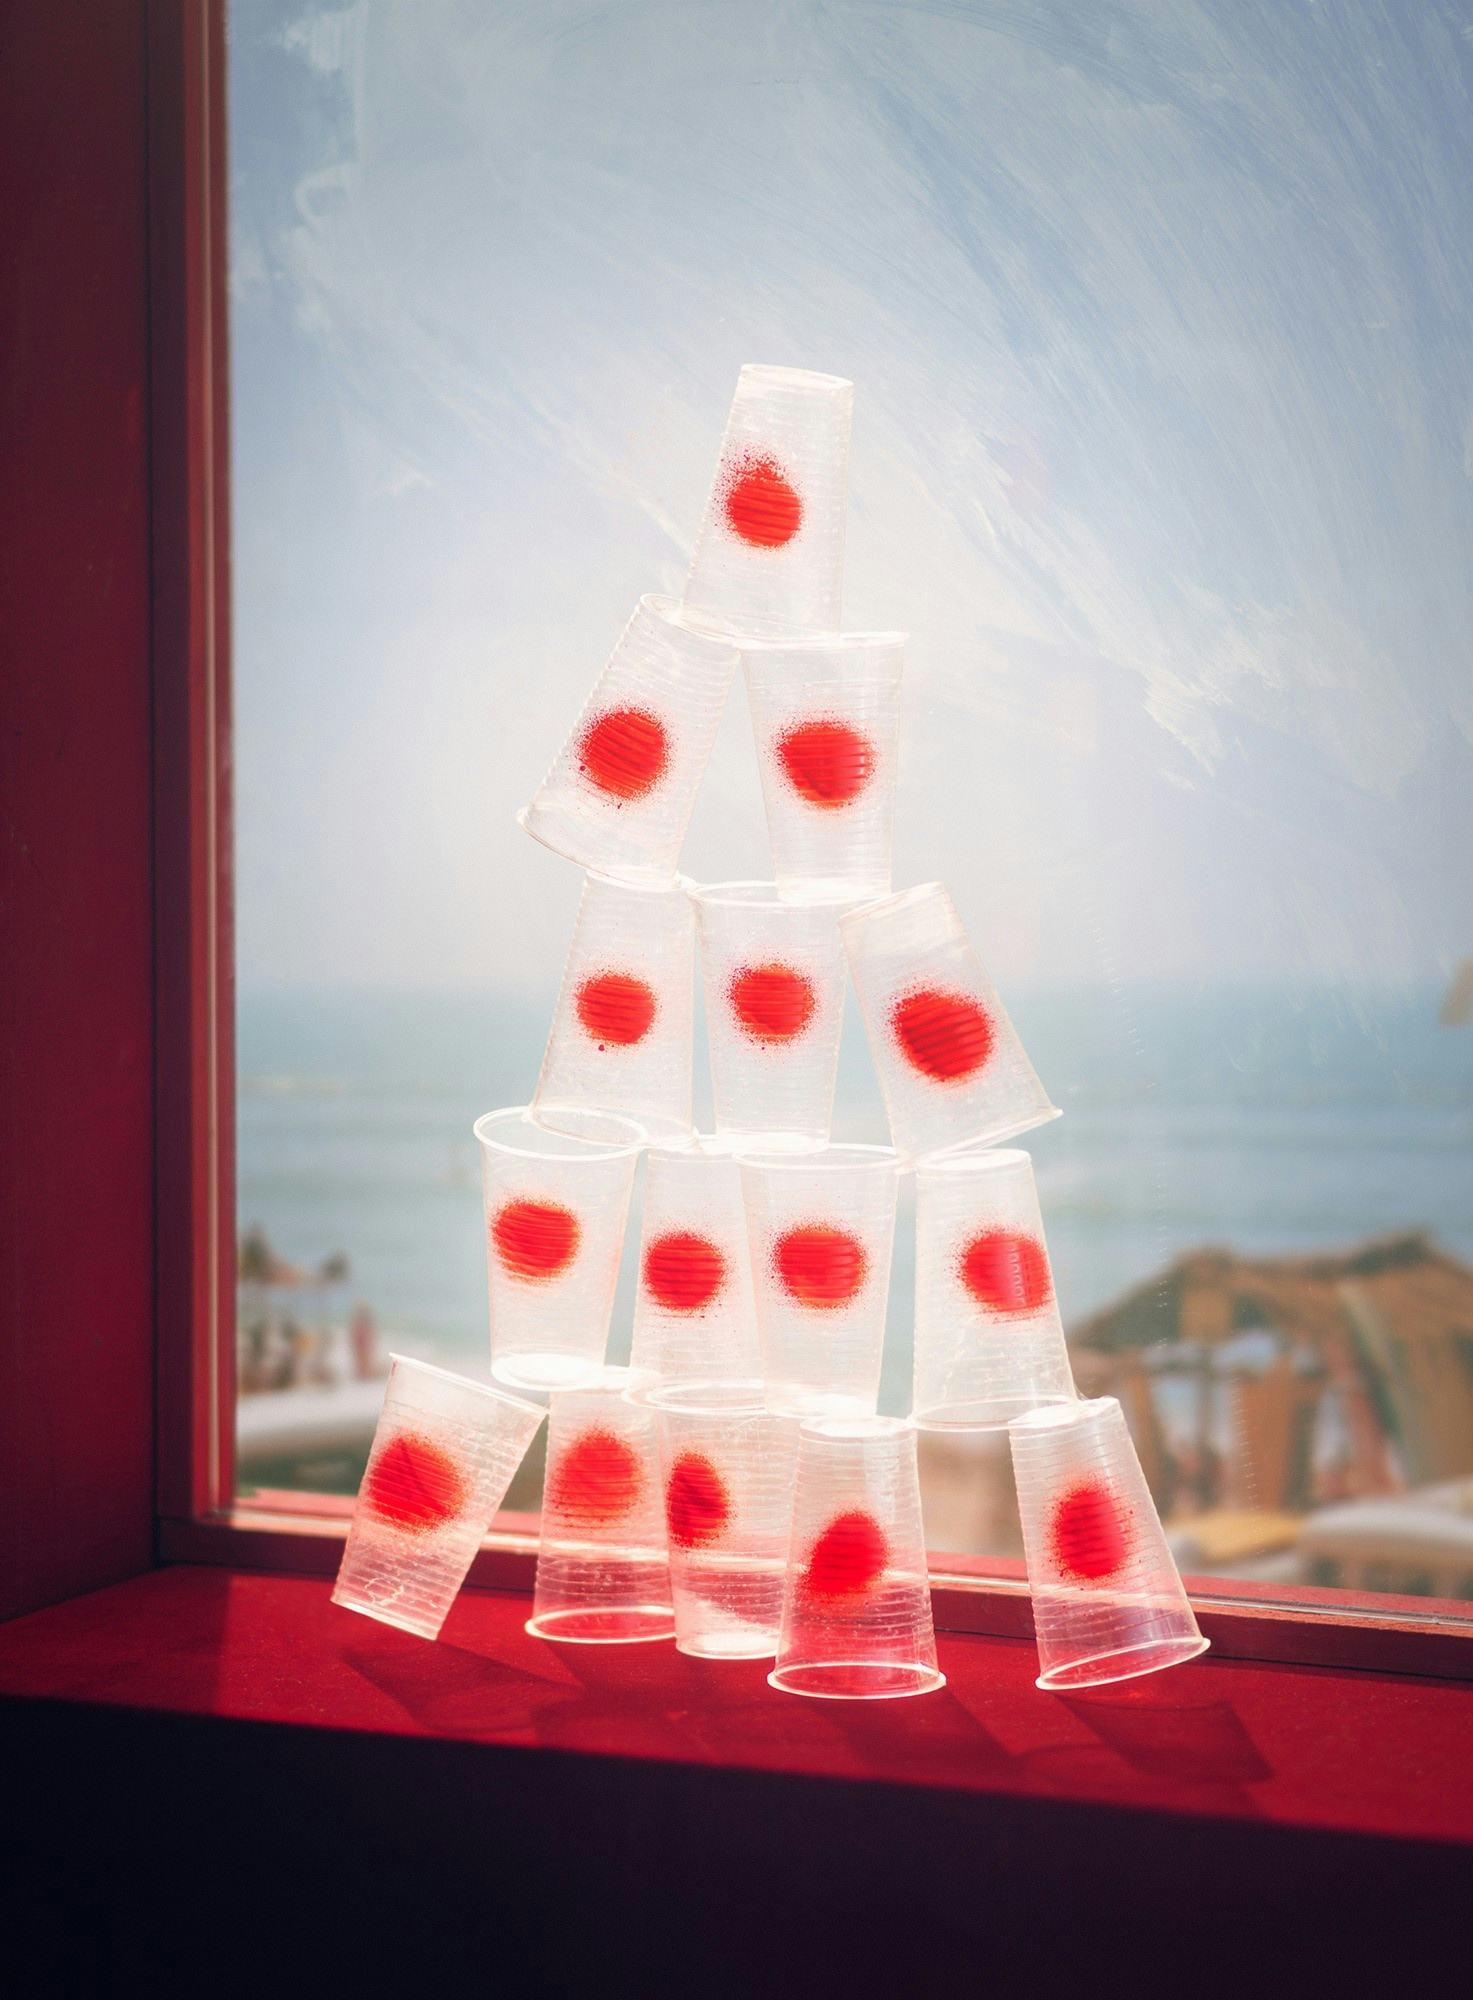 Image of a red window overlooking the ocean. On the window sill is a pyramid of stacked plastic cups, each with a large red dot.